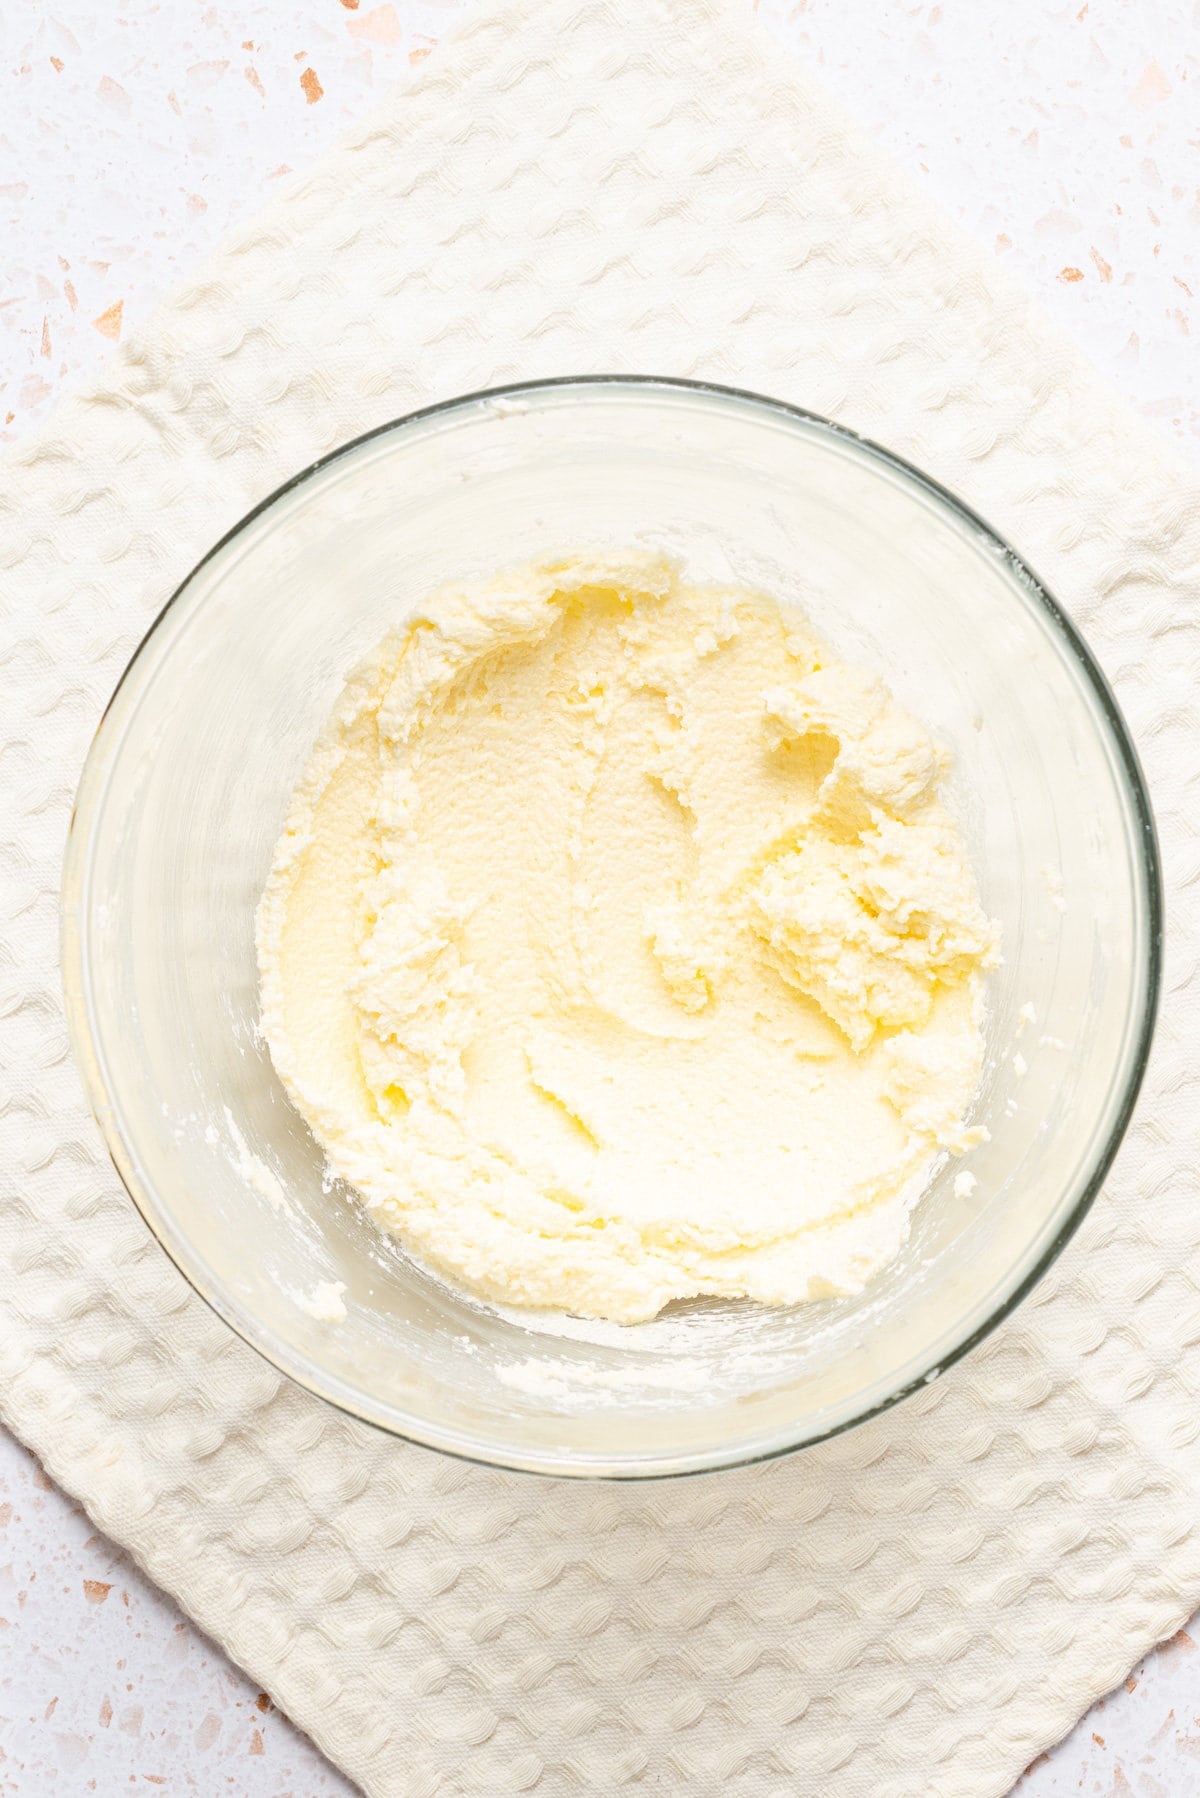 An image of creamy butter and sugar in a bowl.